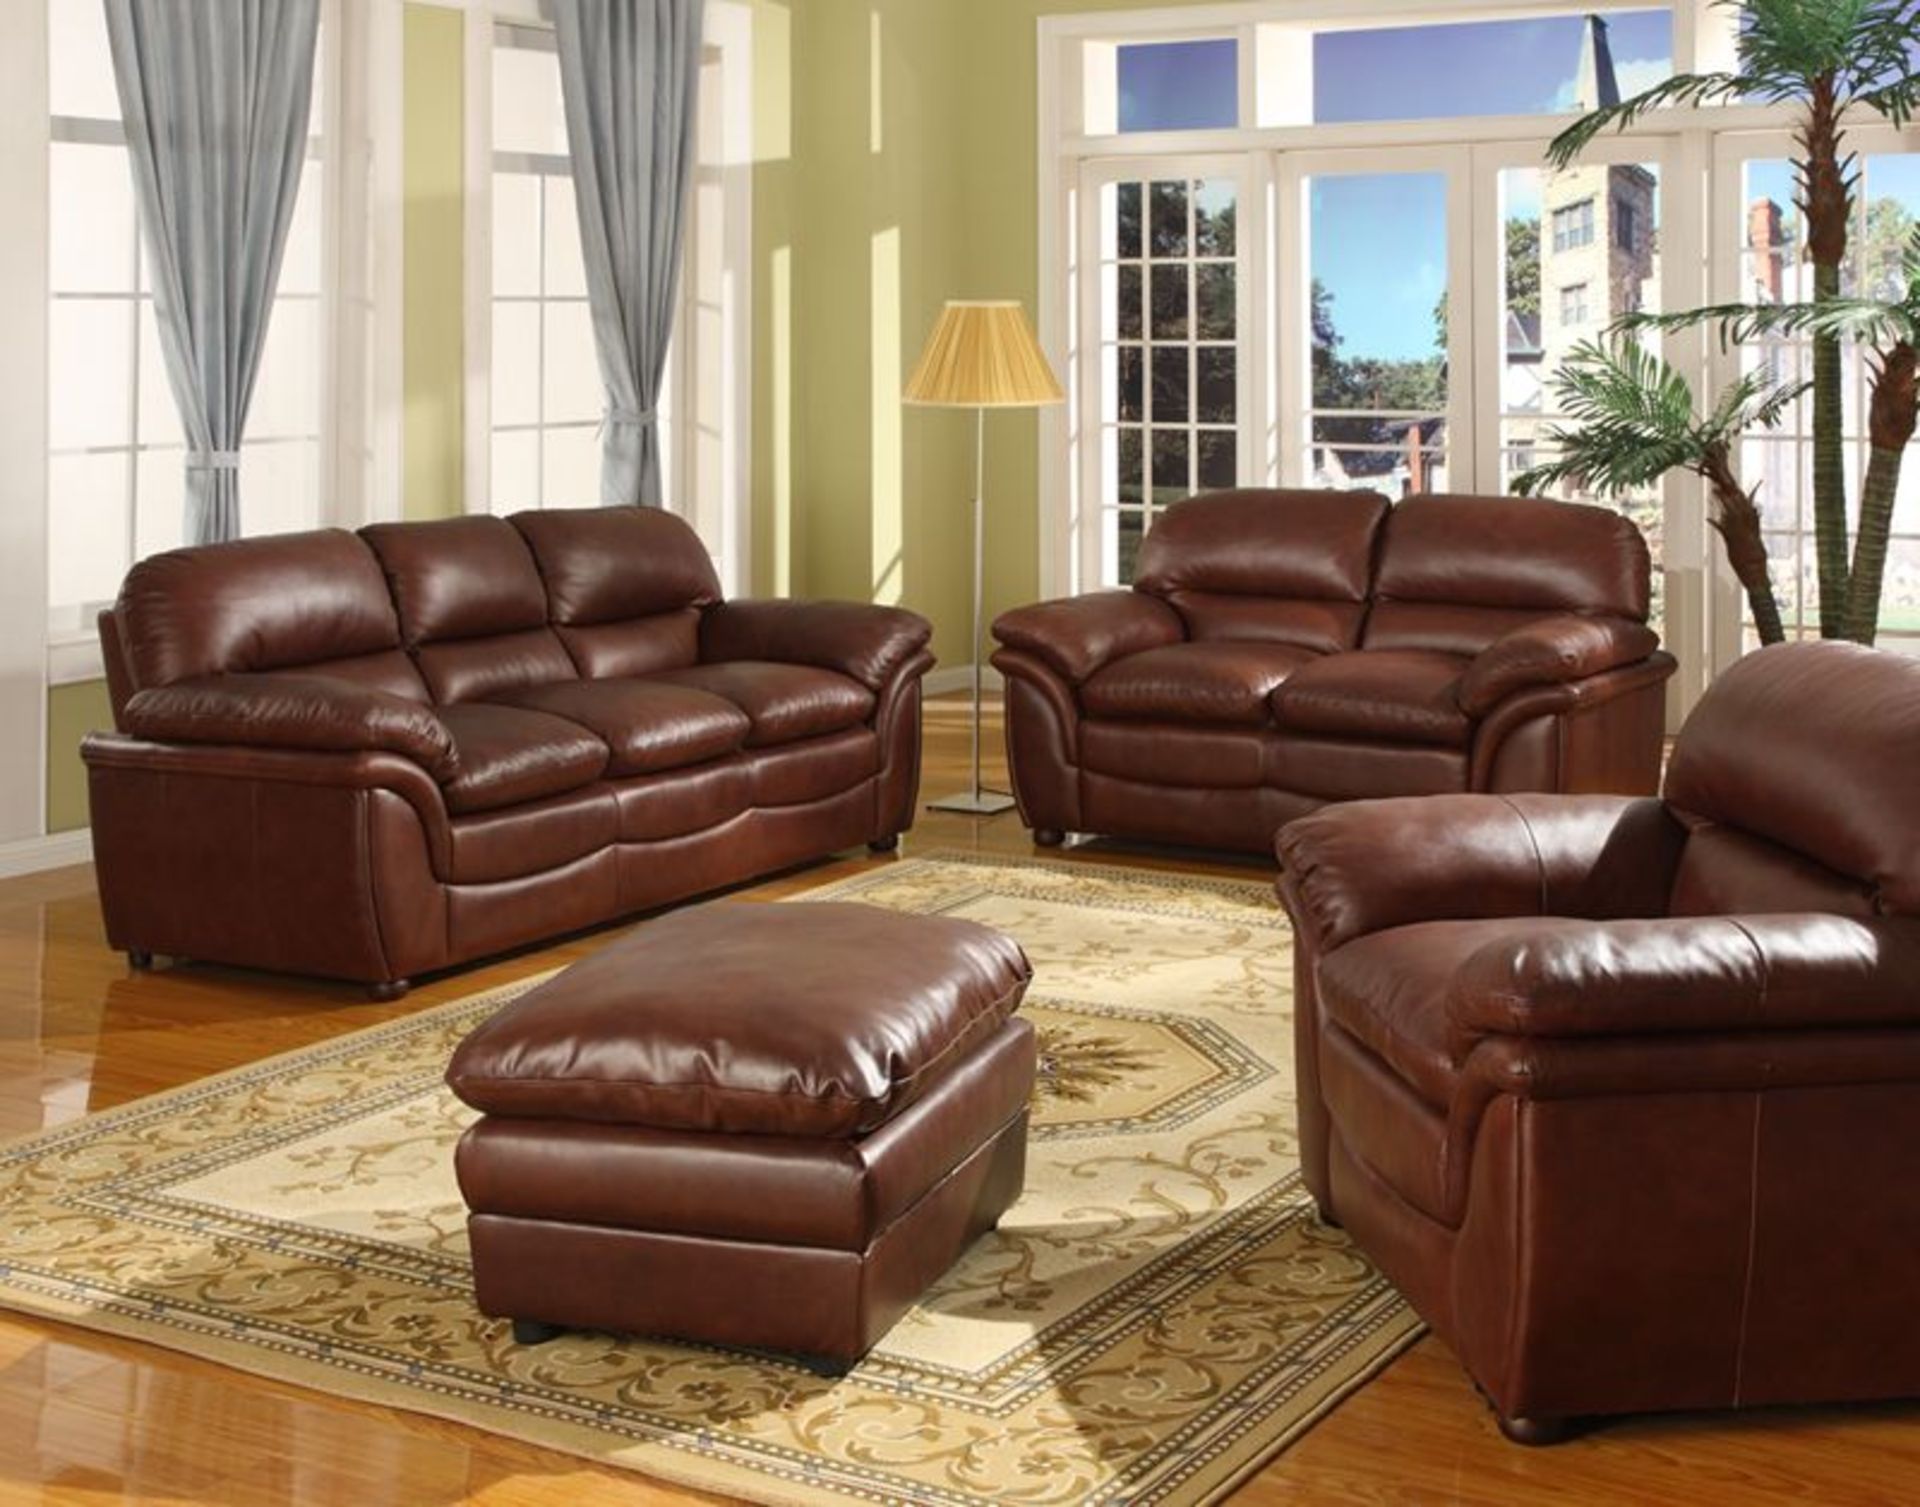 Brand new boxed direct from the manufacturers Veronica 2 seater sofa in shiny brown leather plus 2